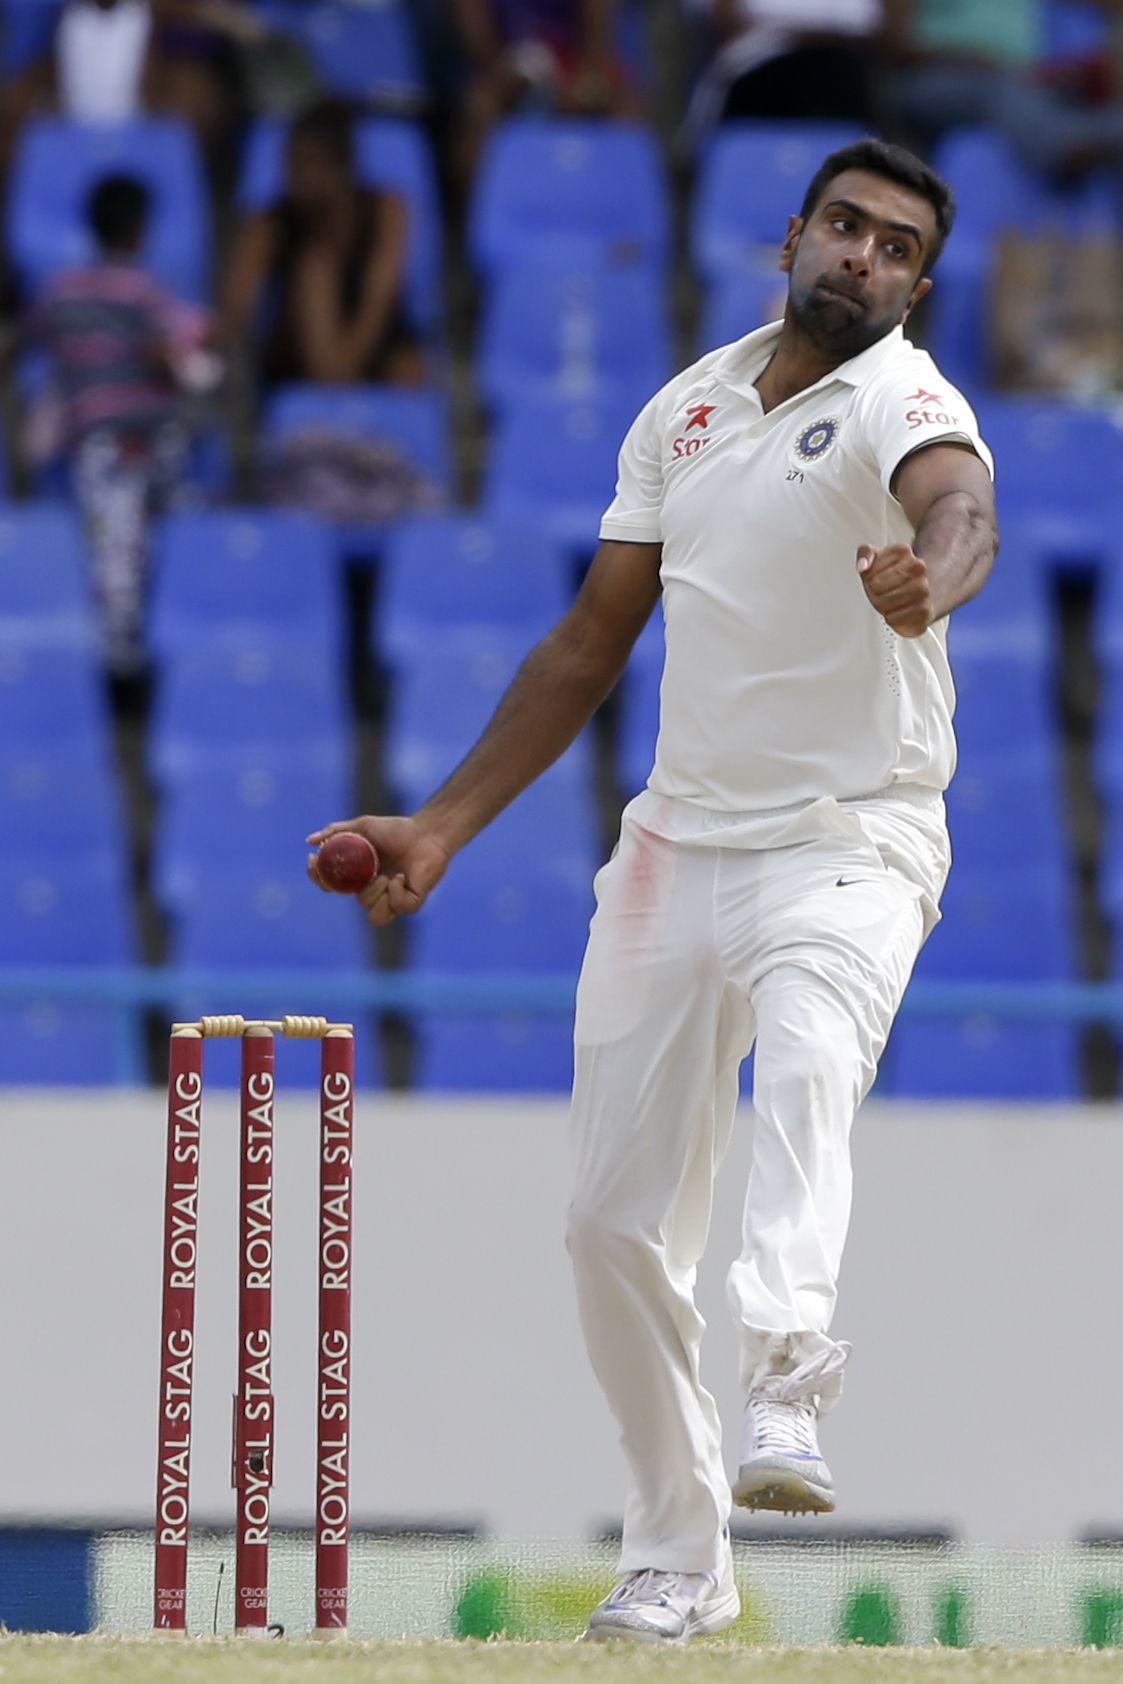 India's Ravichandran Ashwin bowls against West Indies during day four of their first cricket Test match at the Sir Vivian Richards Stadium in North Sound, Antigua, Sunday, July 24, 2016. Ashwin took seven wickets. (AP Photo/Ricardo Mazalan)